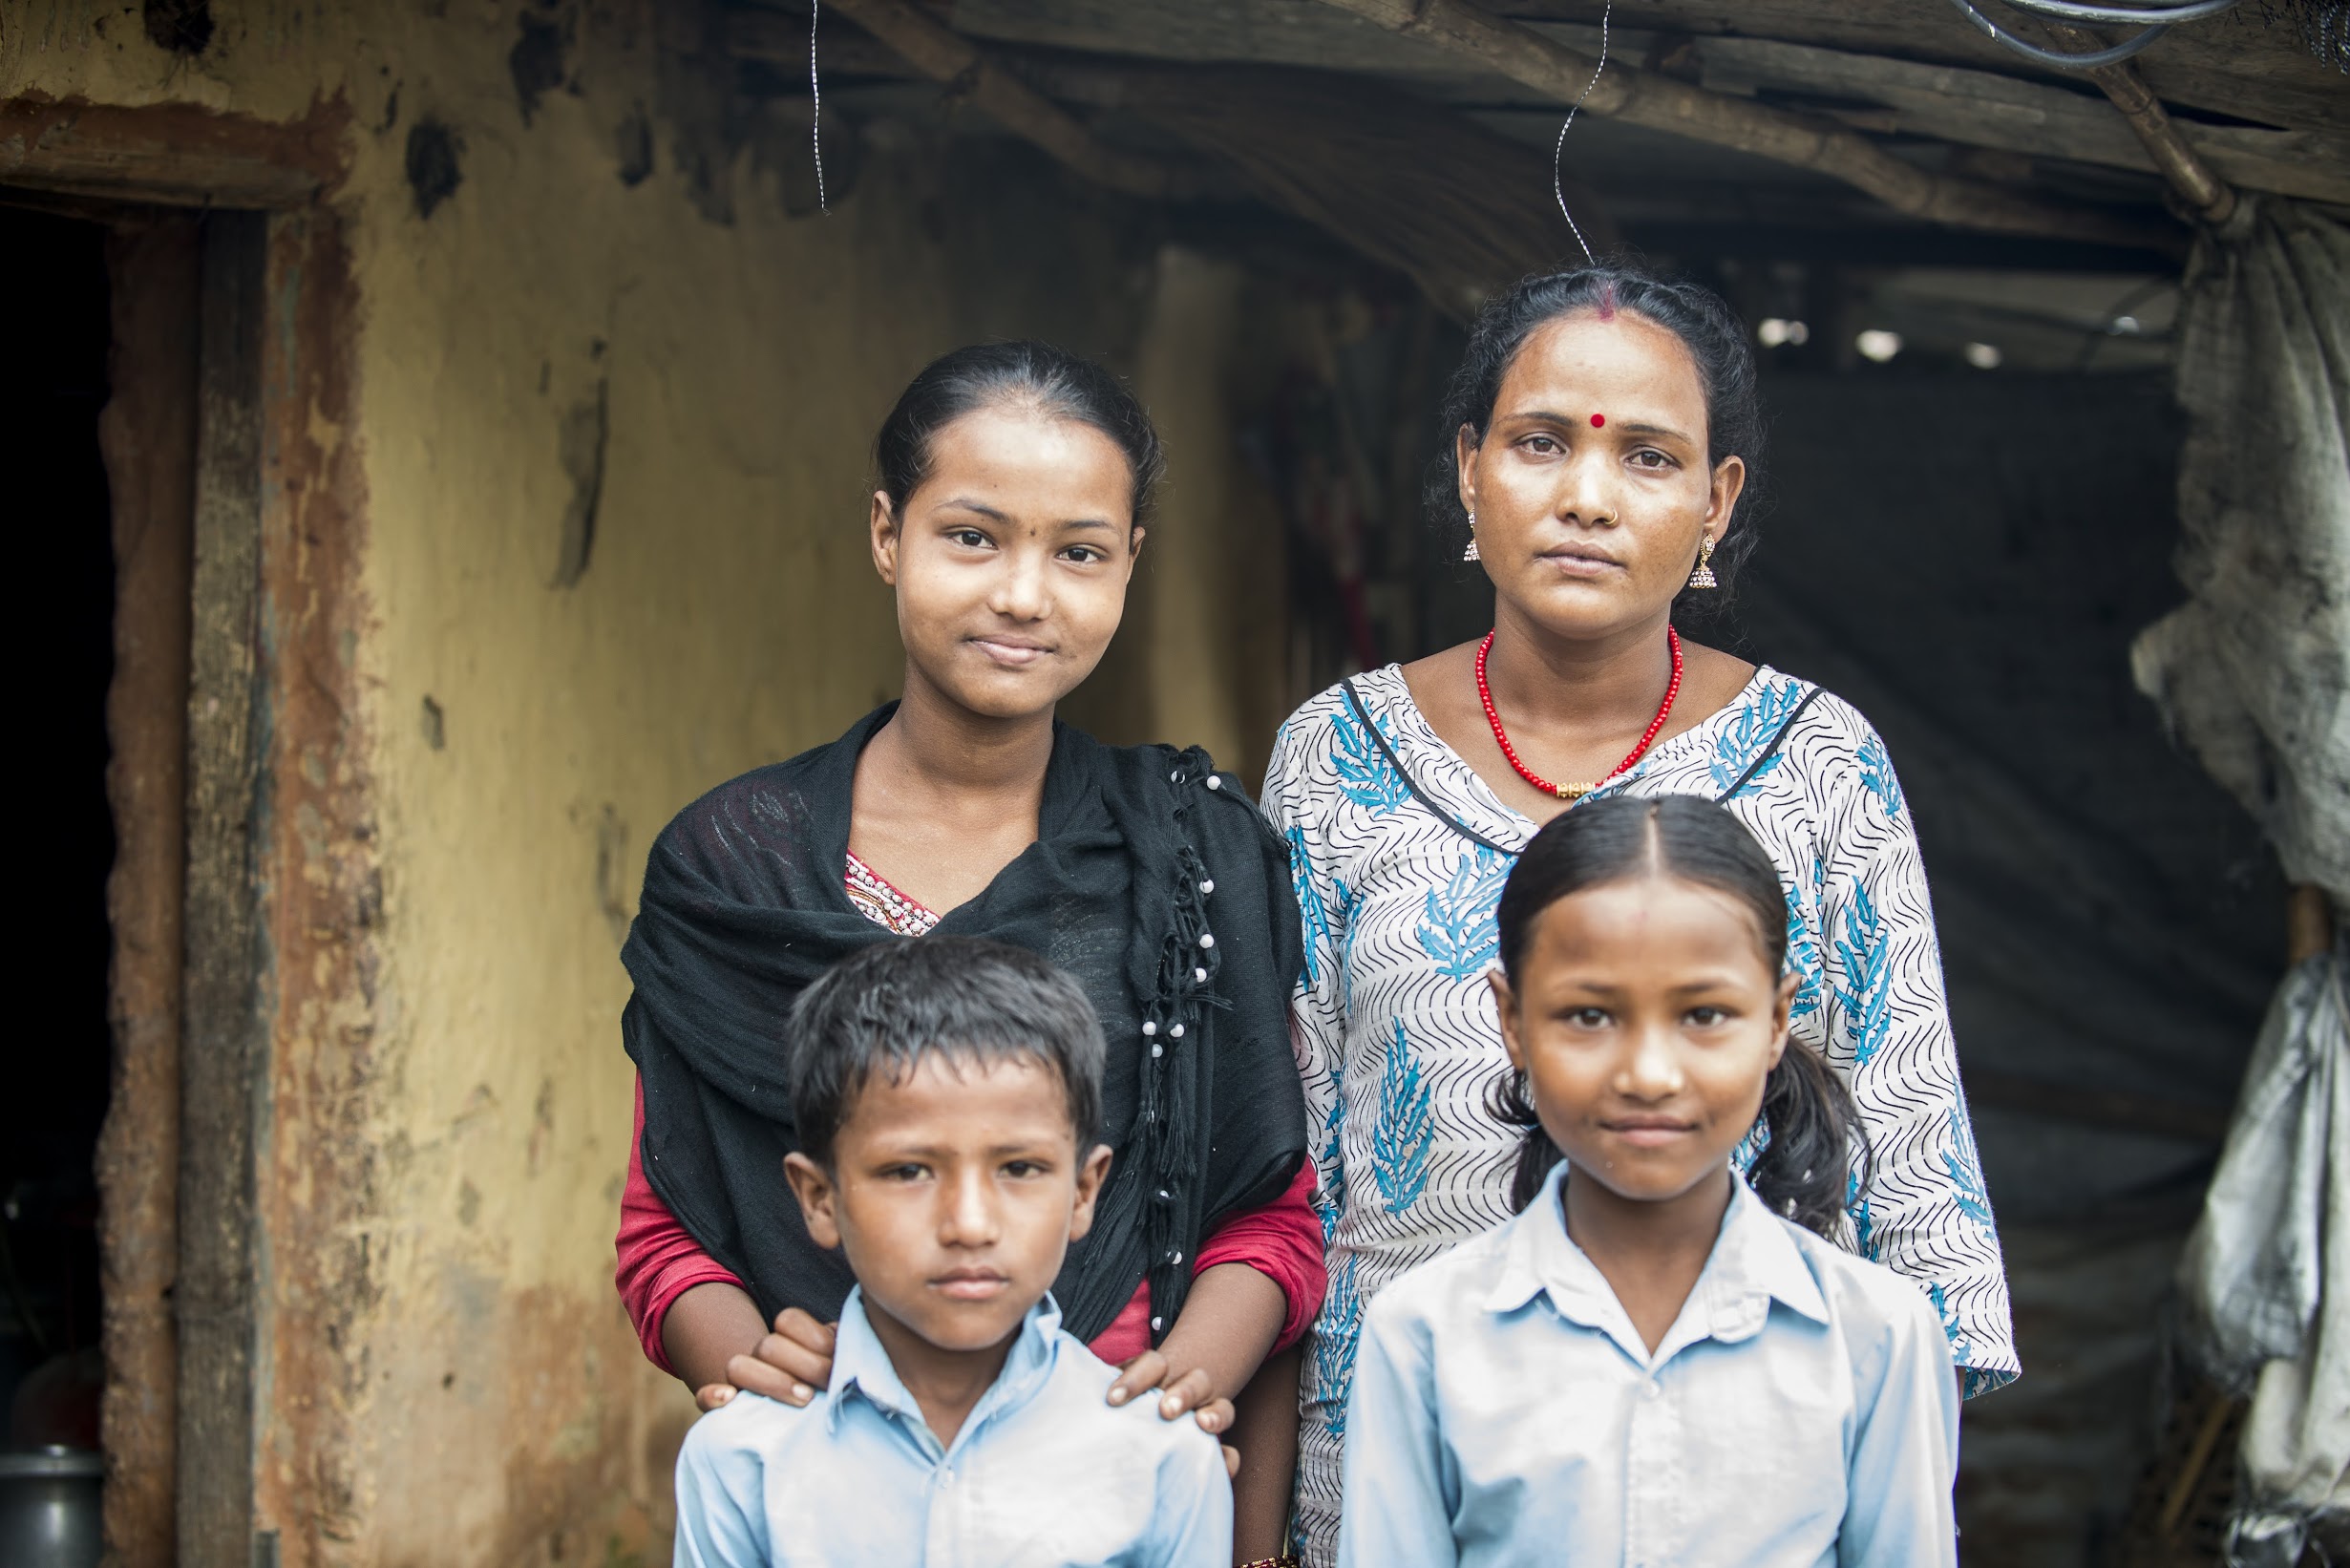 Dhana poses with her three children of her four children before they head to school and she heads to the Women’s Center